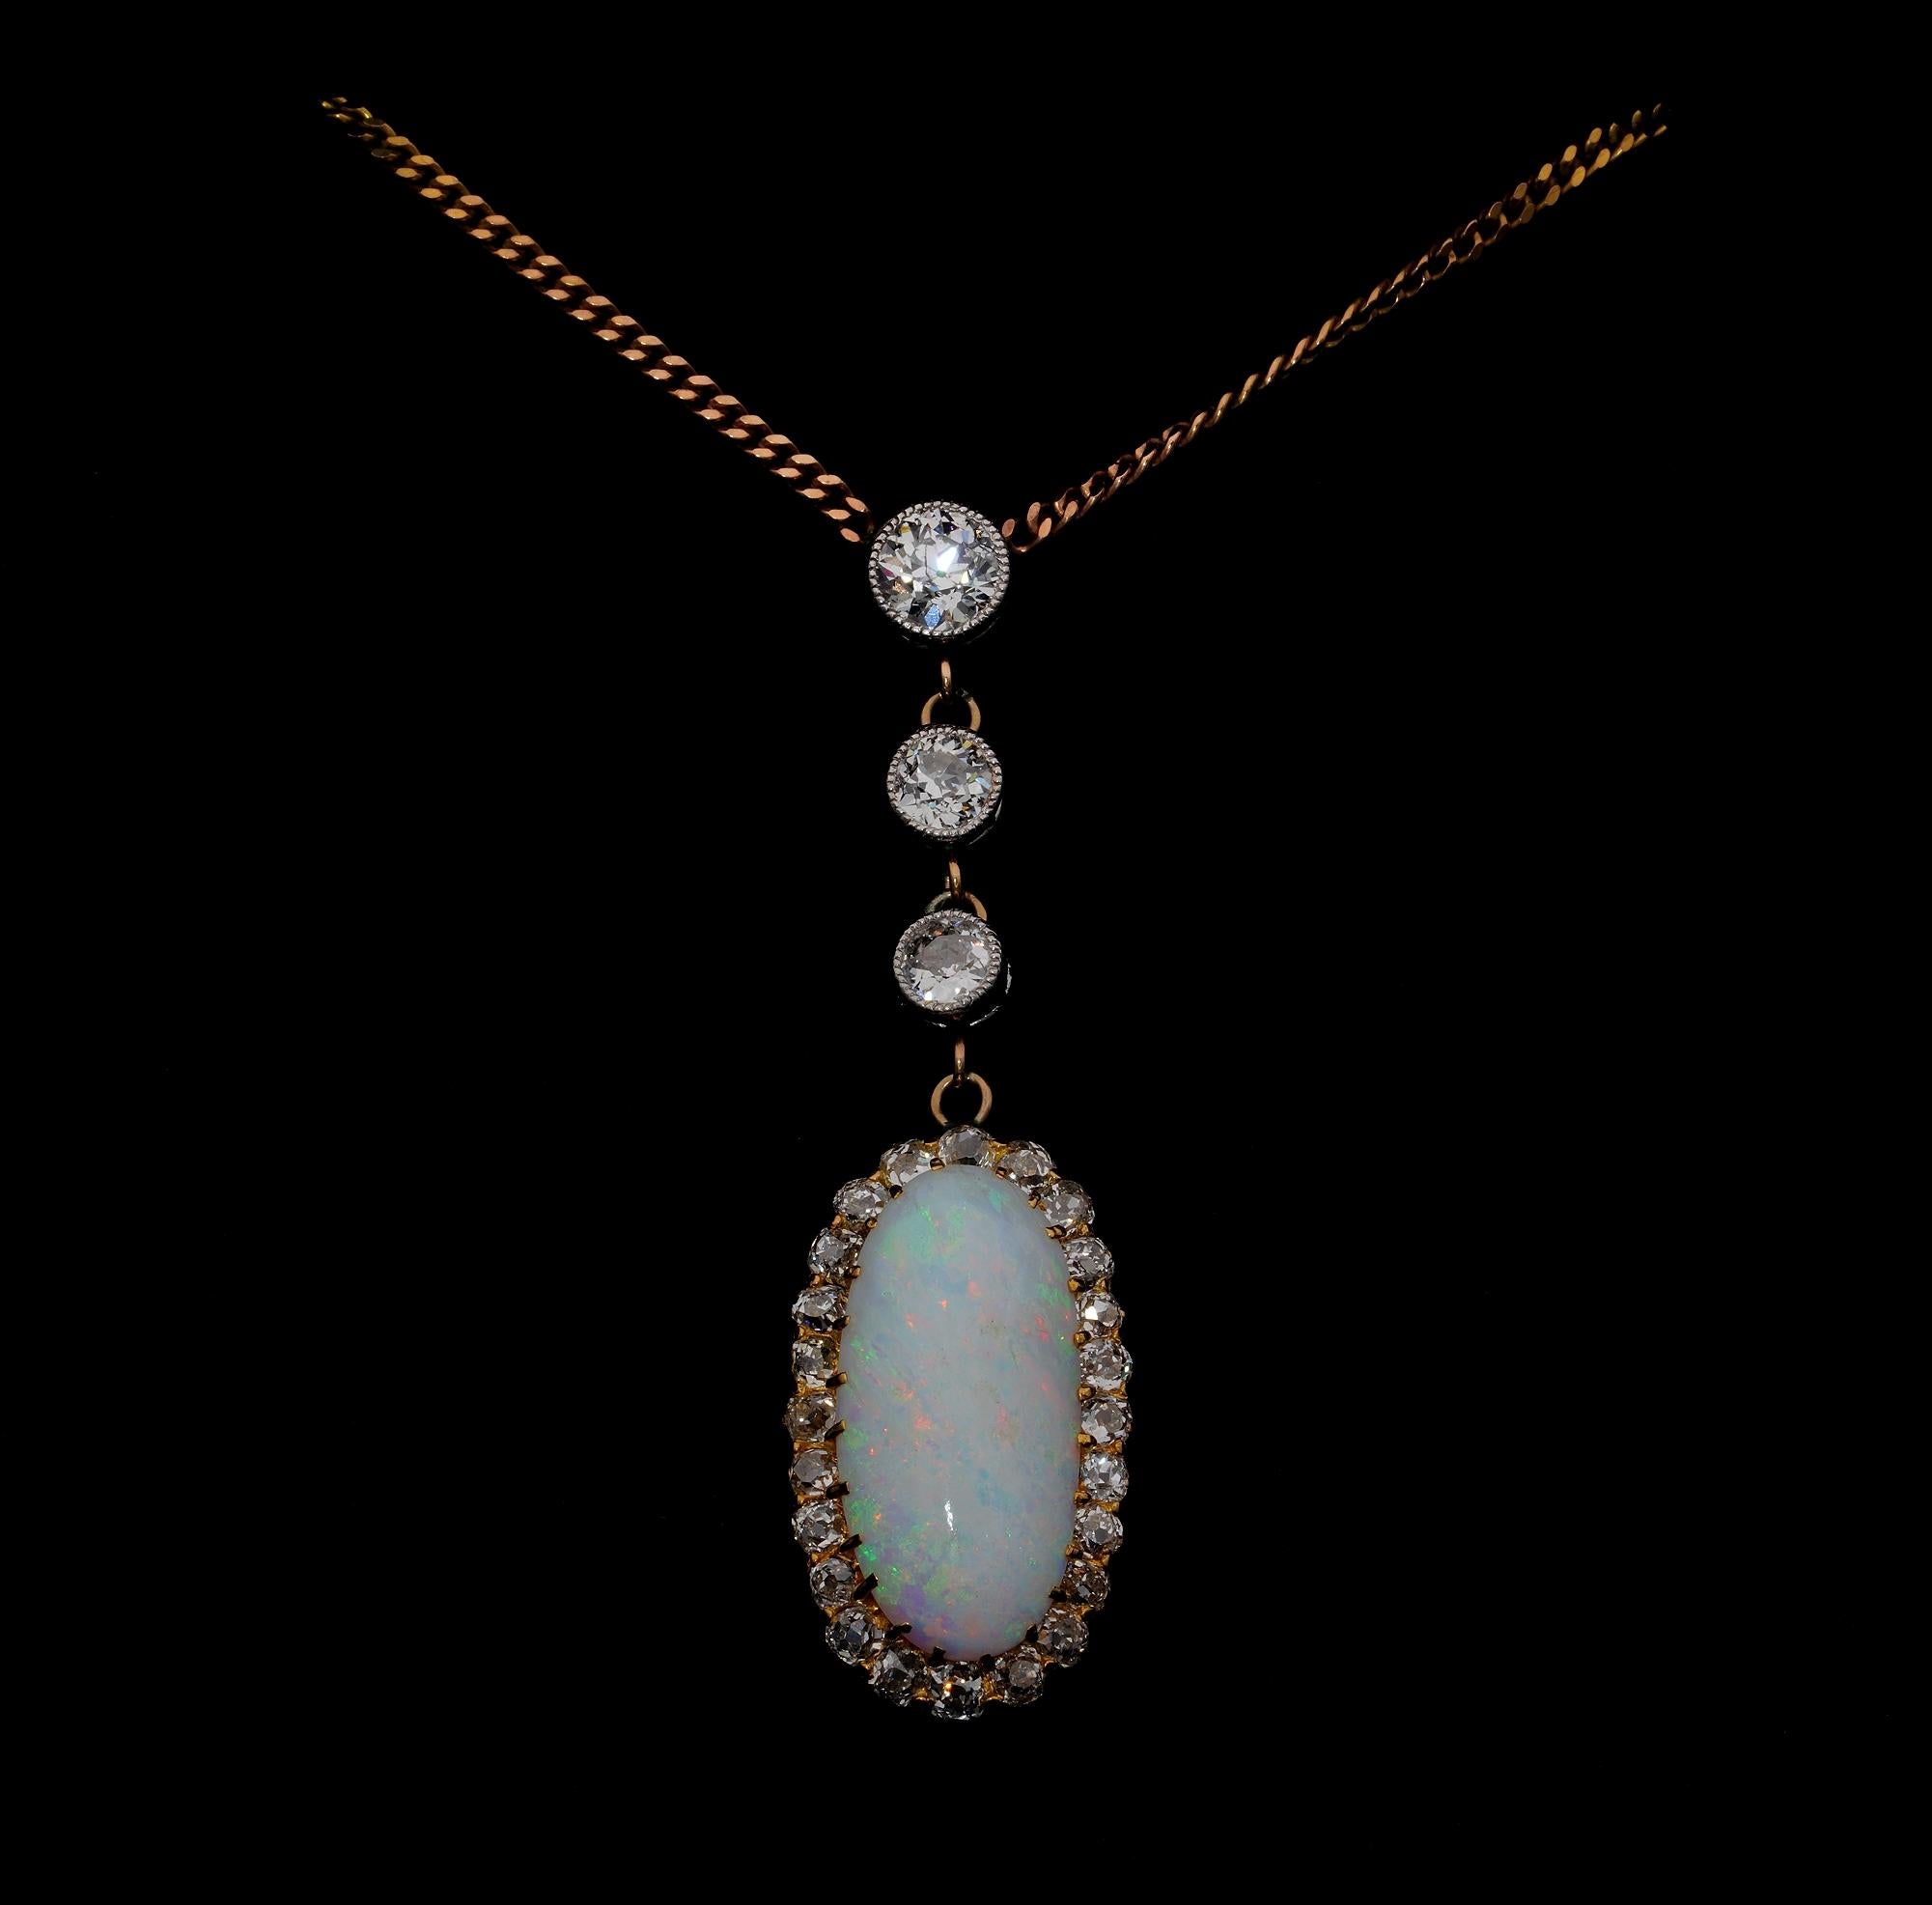 This gorgeous Edwardian period necklace is 1910
Fine hand crafting of 18 KT / Platinum matched with a 9 KT traditional chain as found
A lovely elongated pendant with a diamond line leading to the suspended Opal Pendant set in Diamonds halo
A 6.00